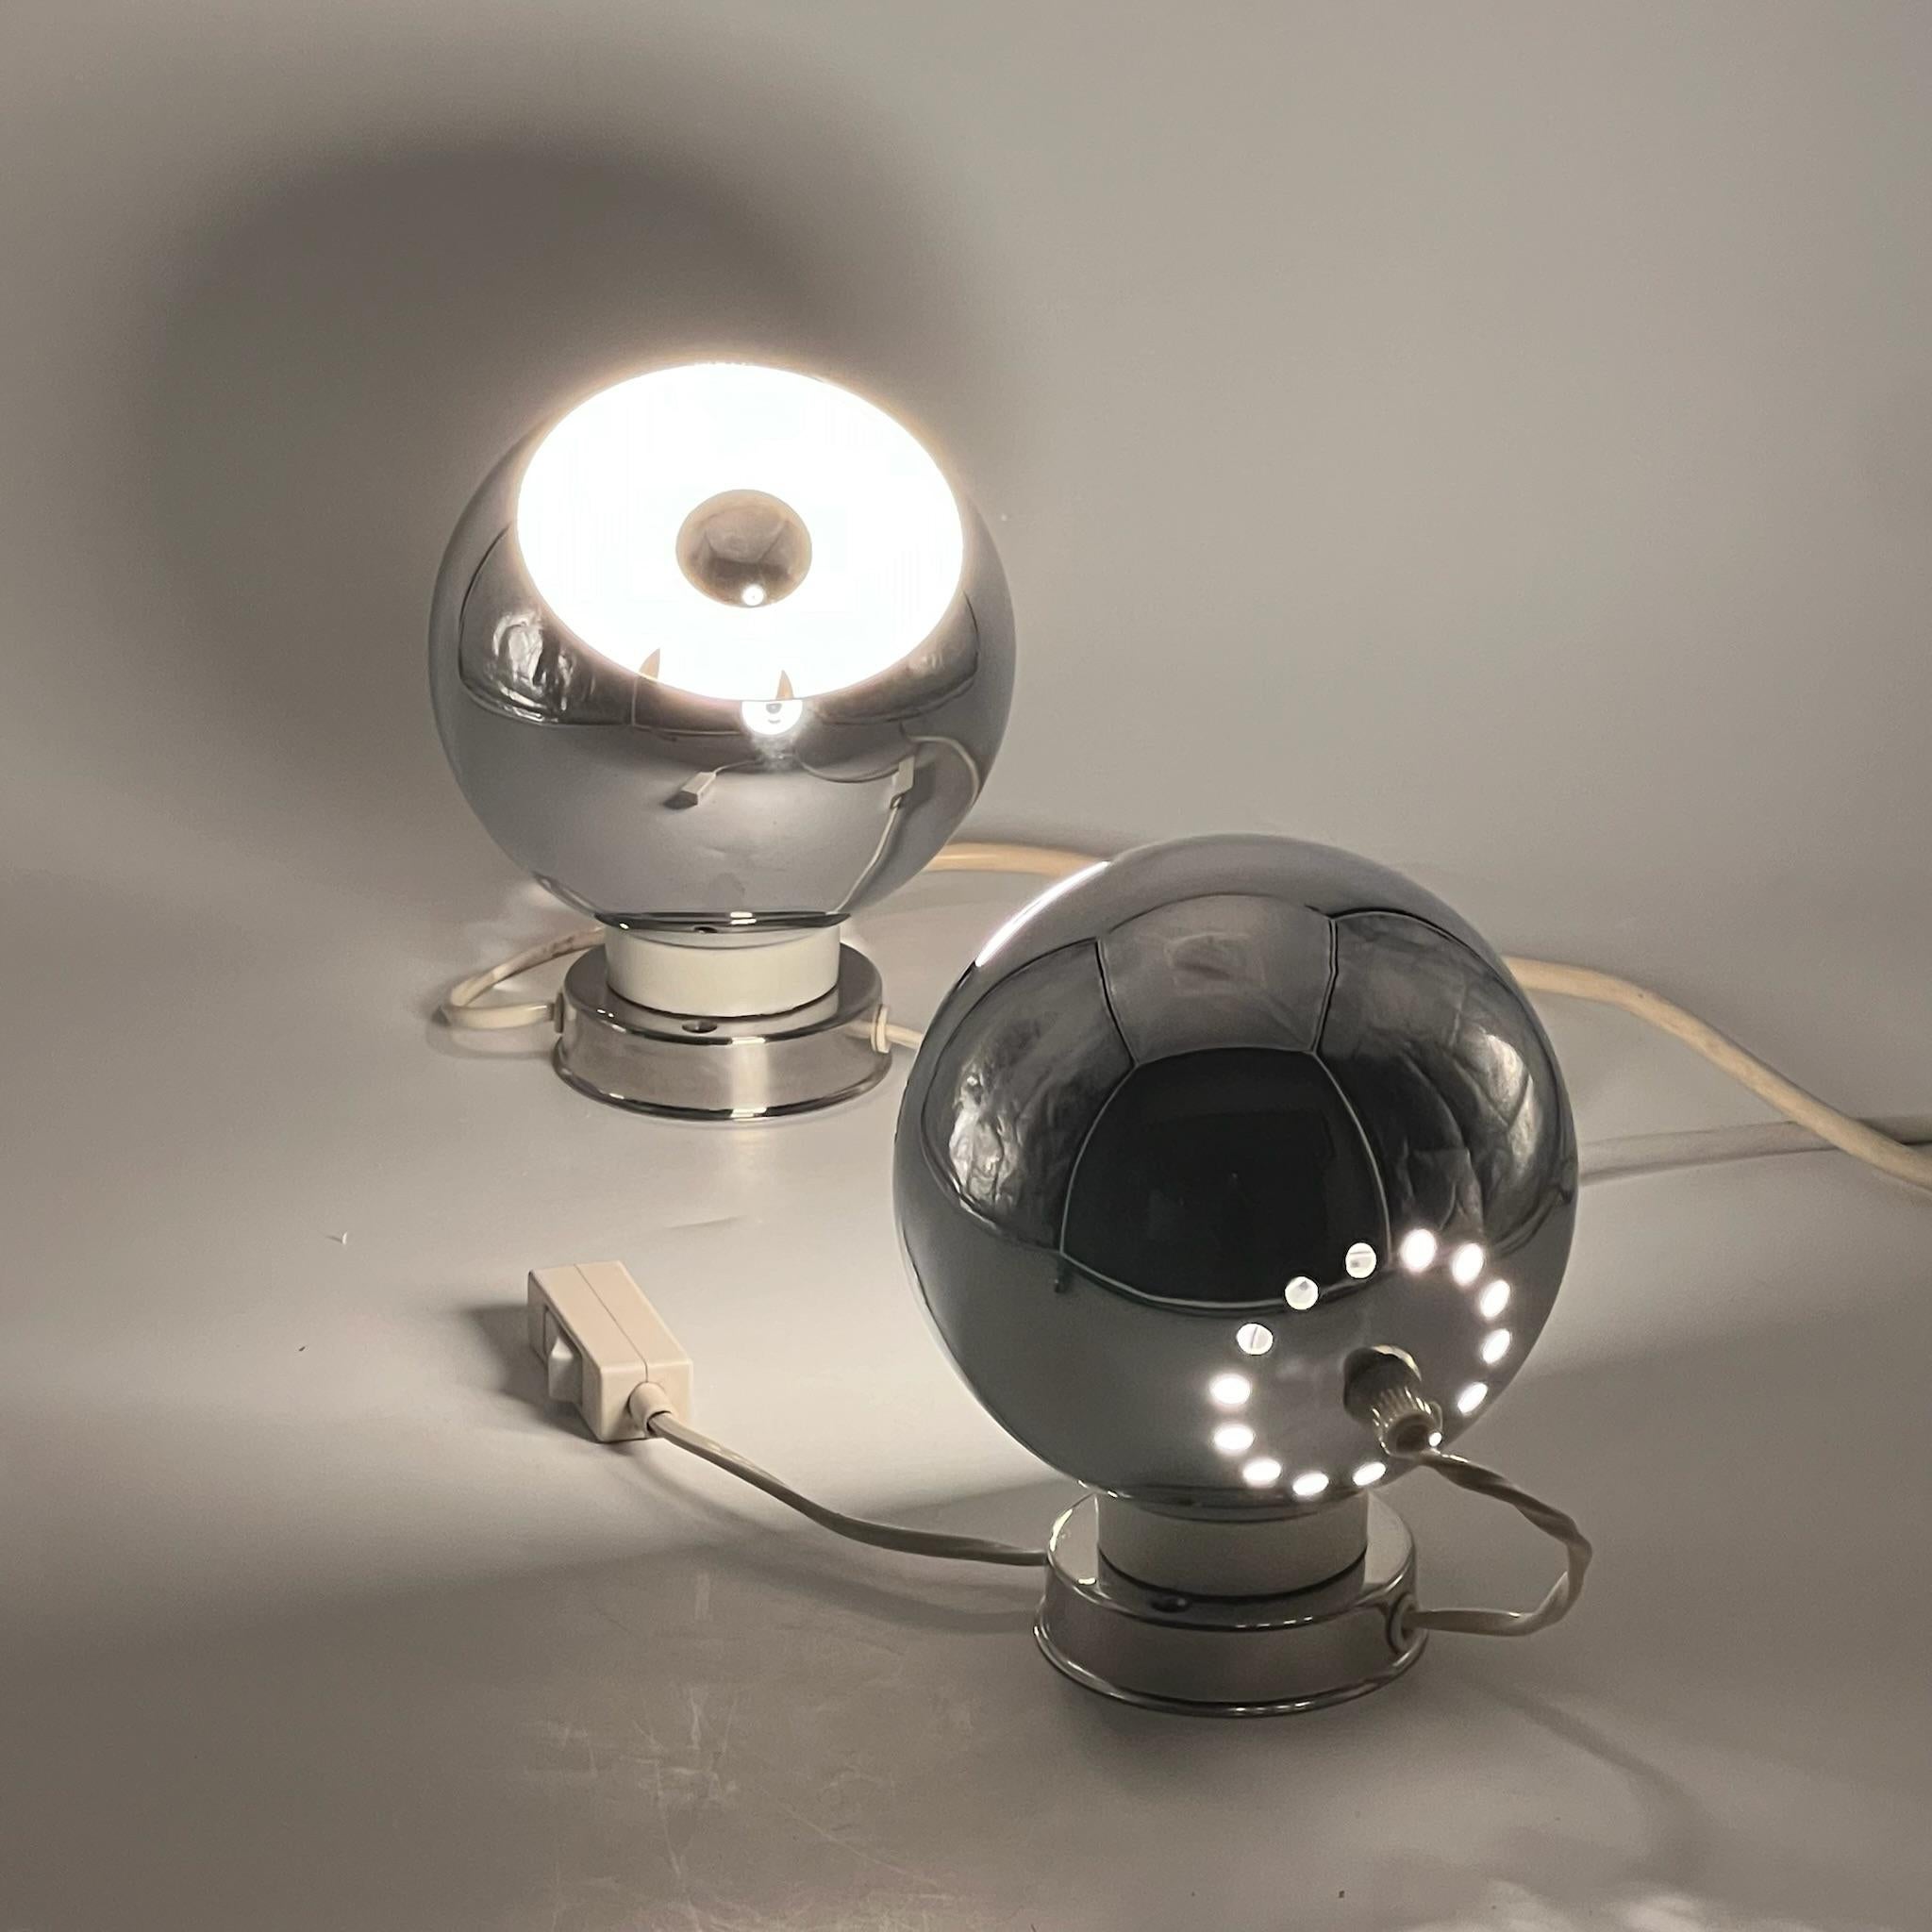 Iconic Reggiani 'Eyeball' Lamps 60s - Pair of Vintage Masterpieces - Set of 2 For Sale 4